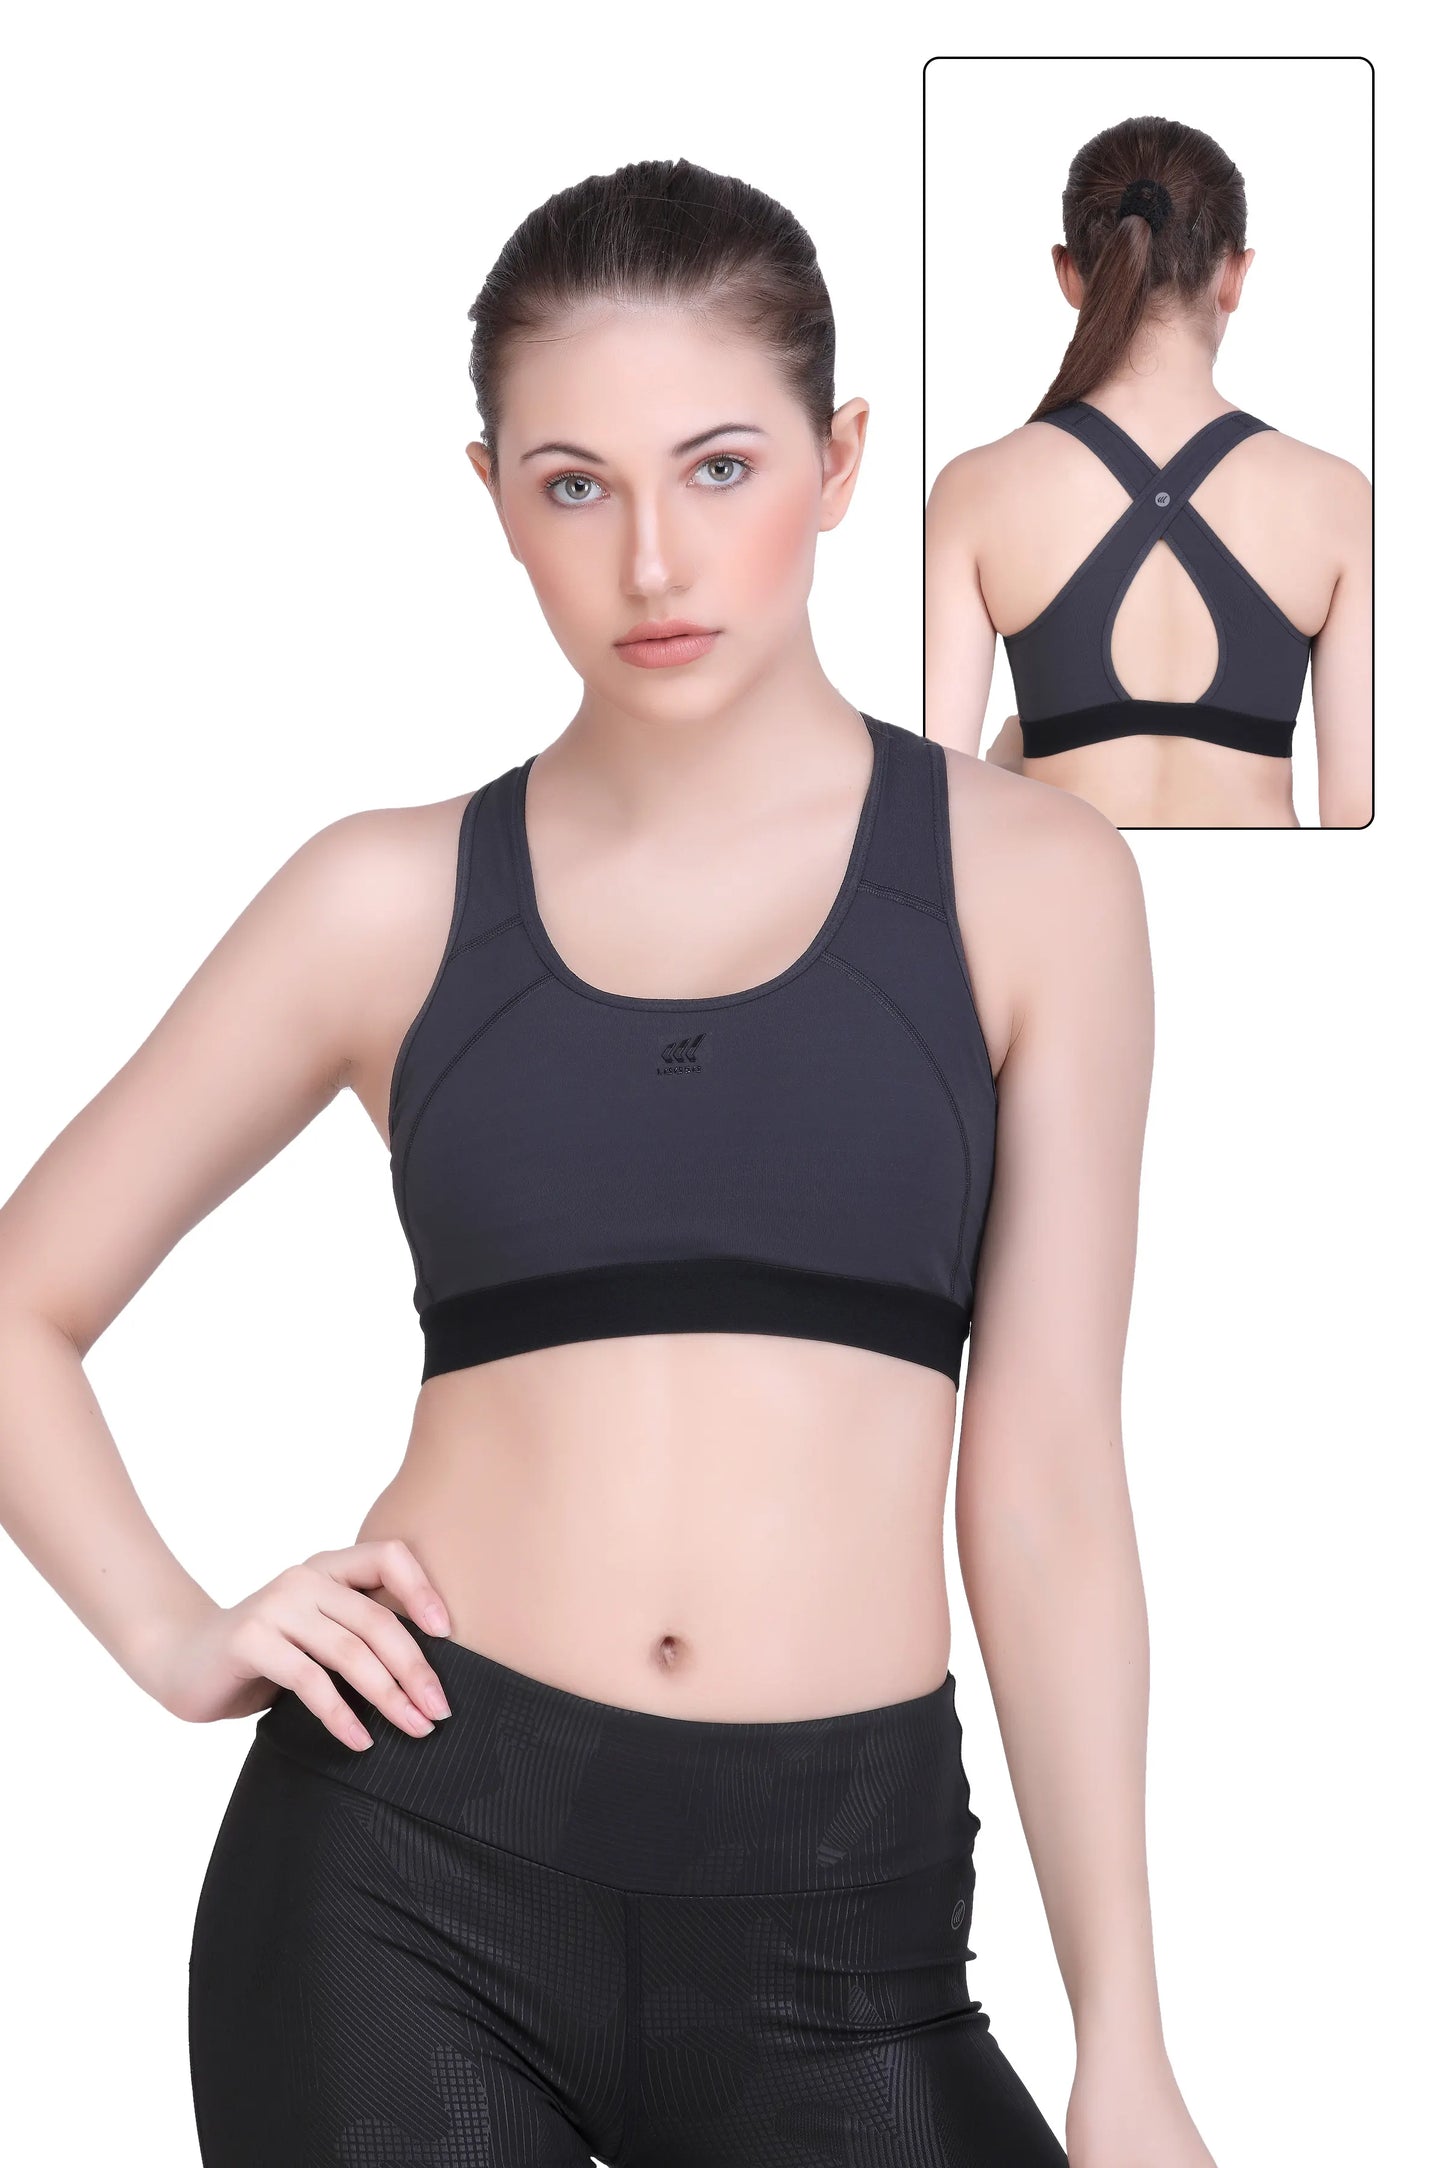 JUST DRY NYLON MATTE RUNNING SPORTS BRA WITH CROSS BACK STYLE